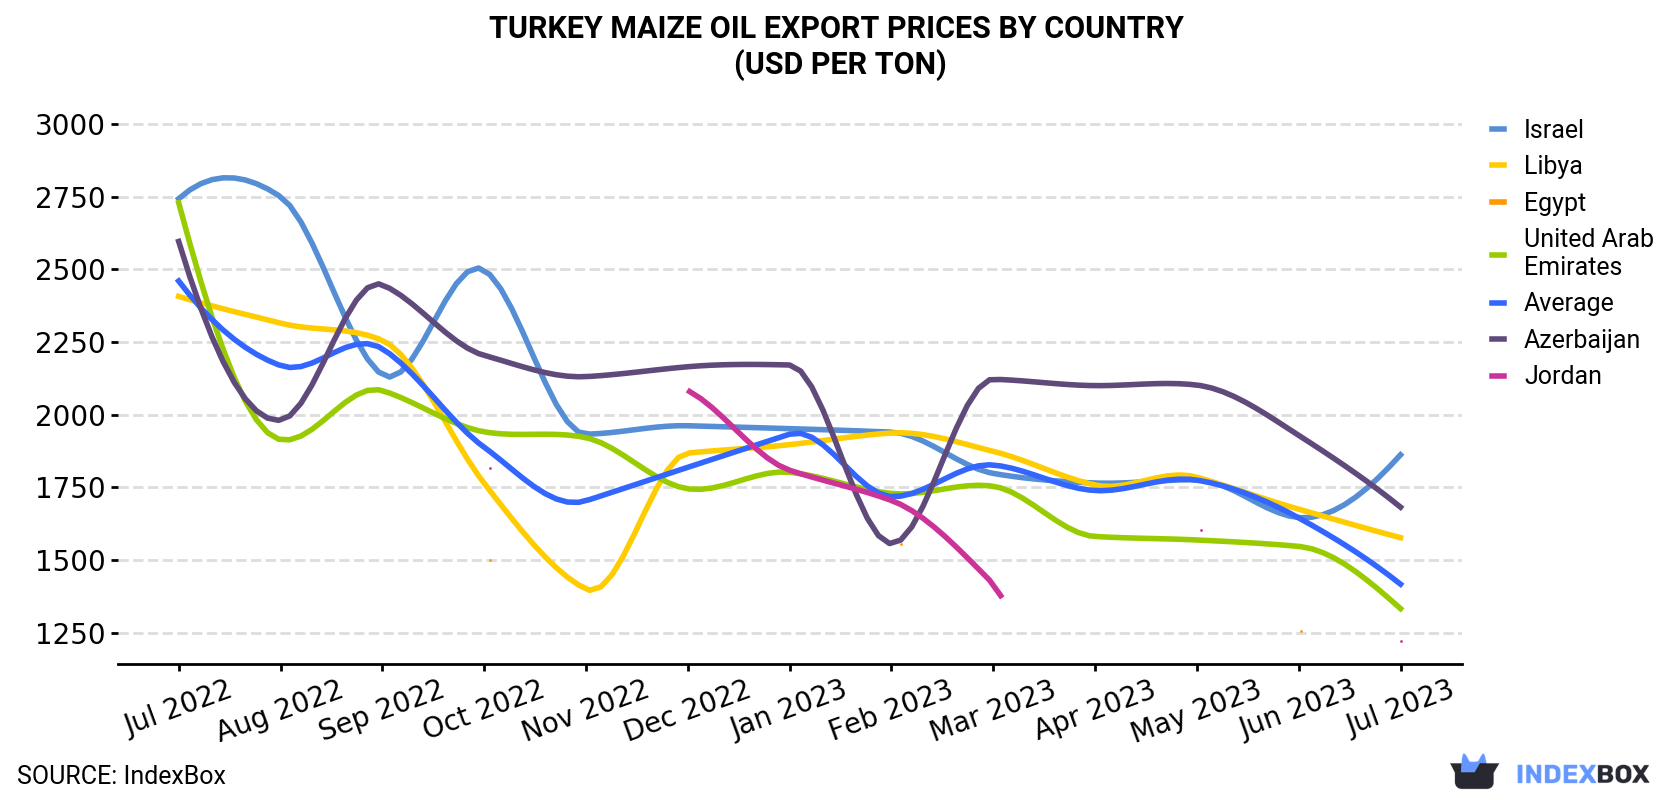 Turkey Maize Oil Export Prices By Country (USD Per Ton)